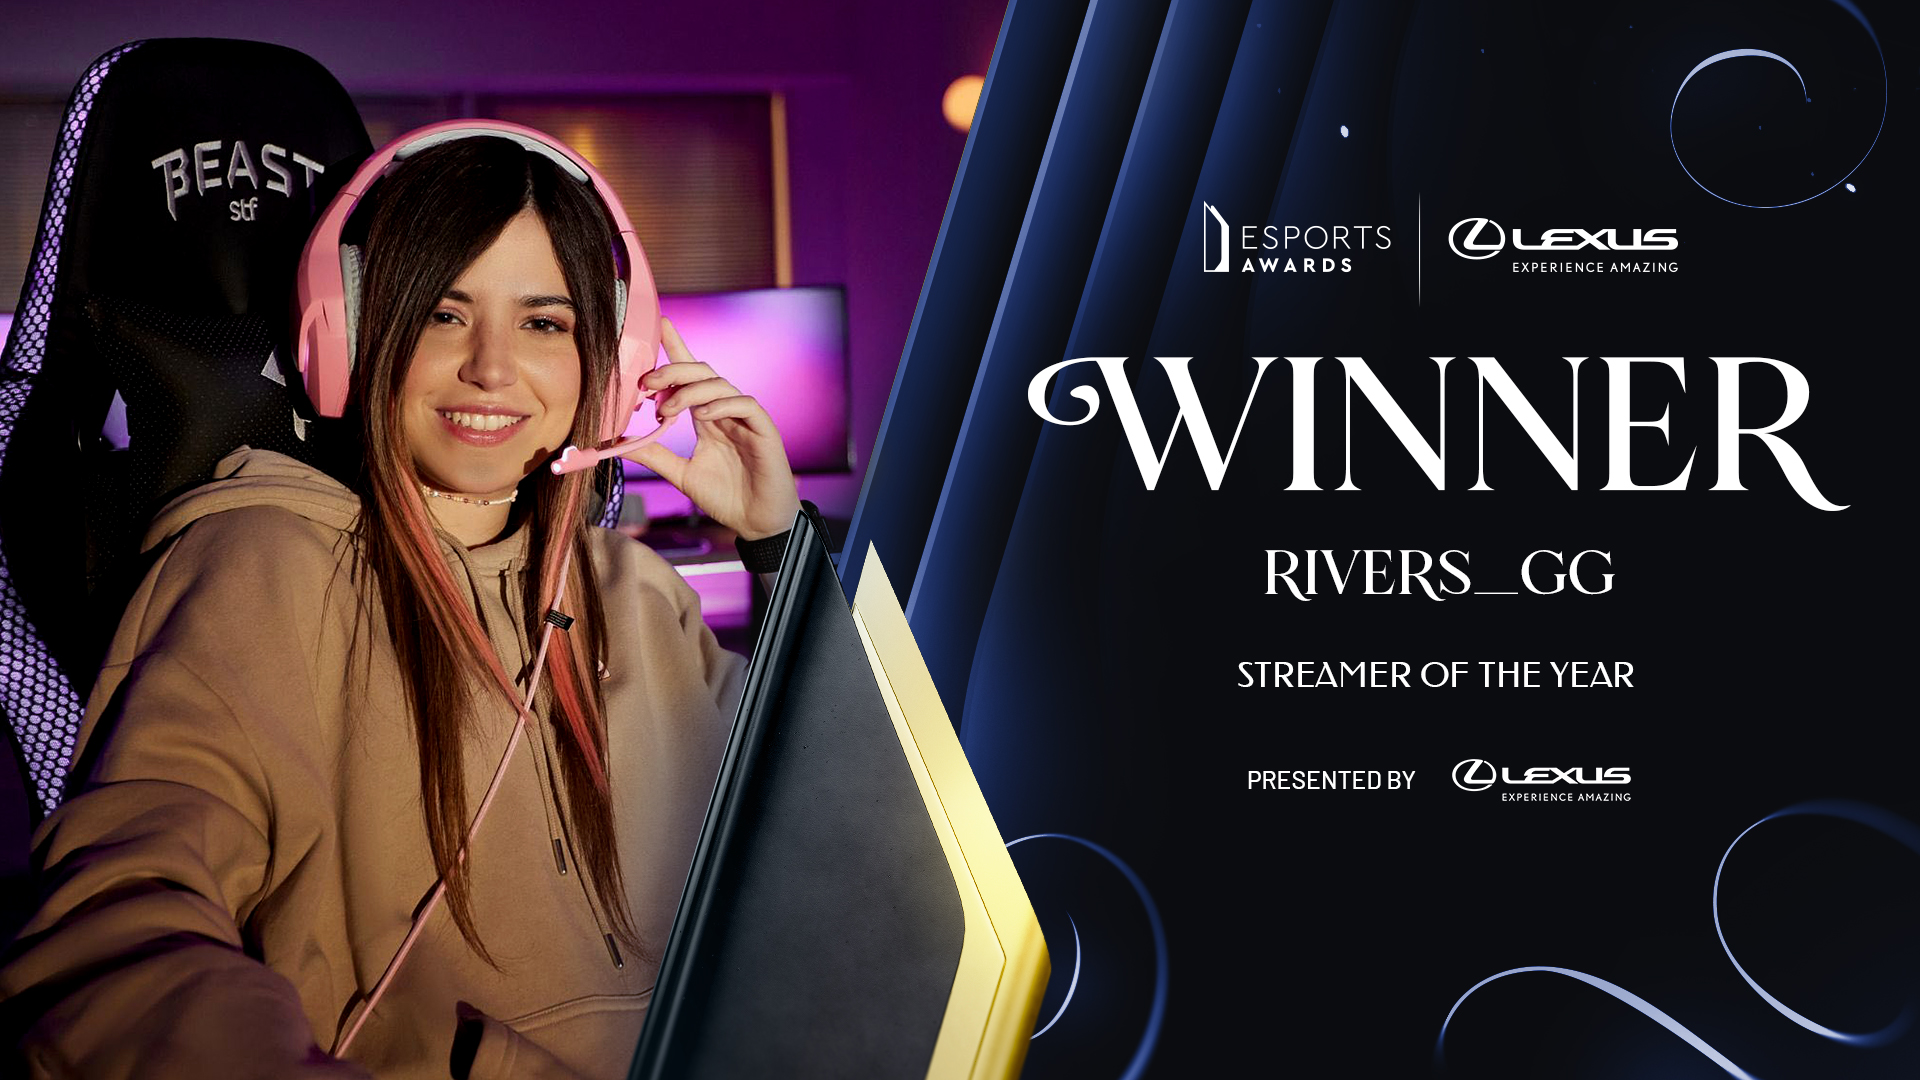 Streamer of the Year: Rivers_GG